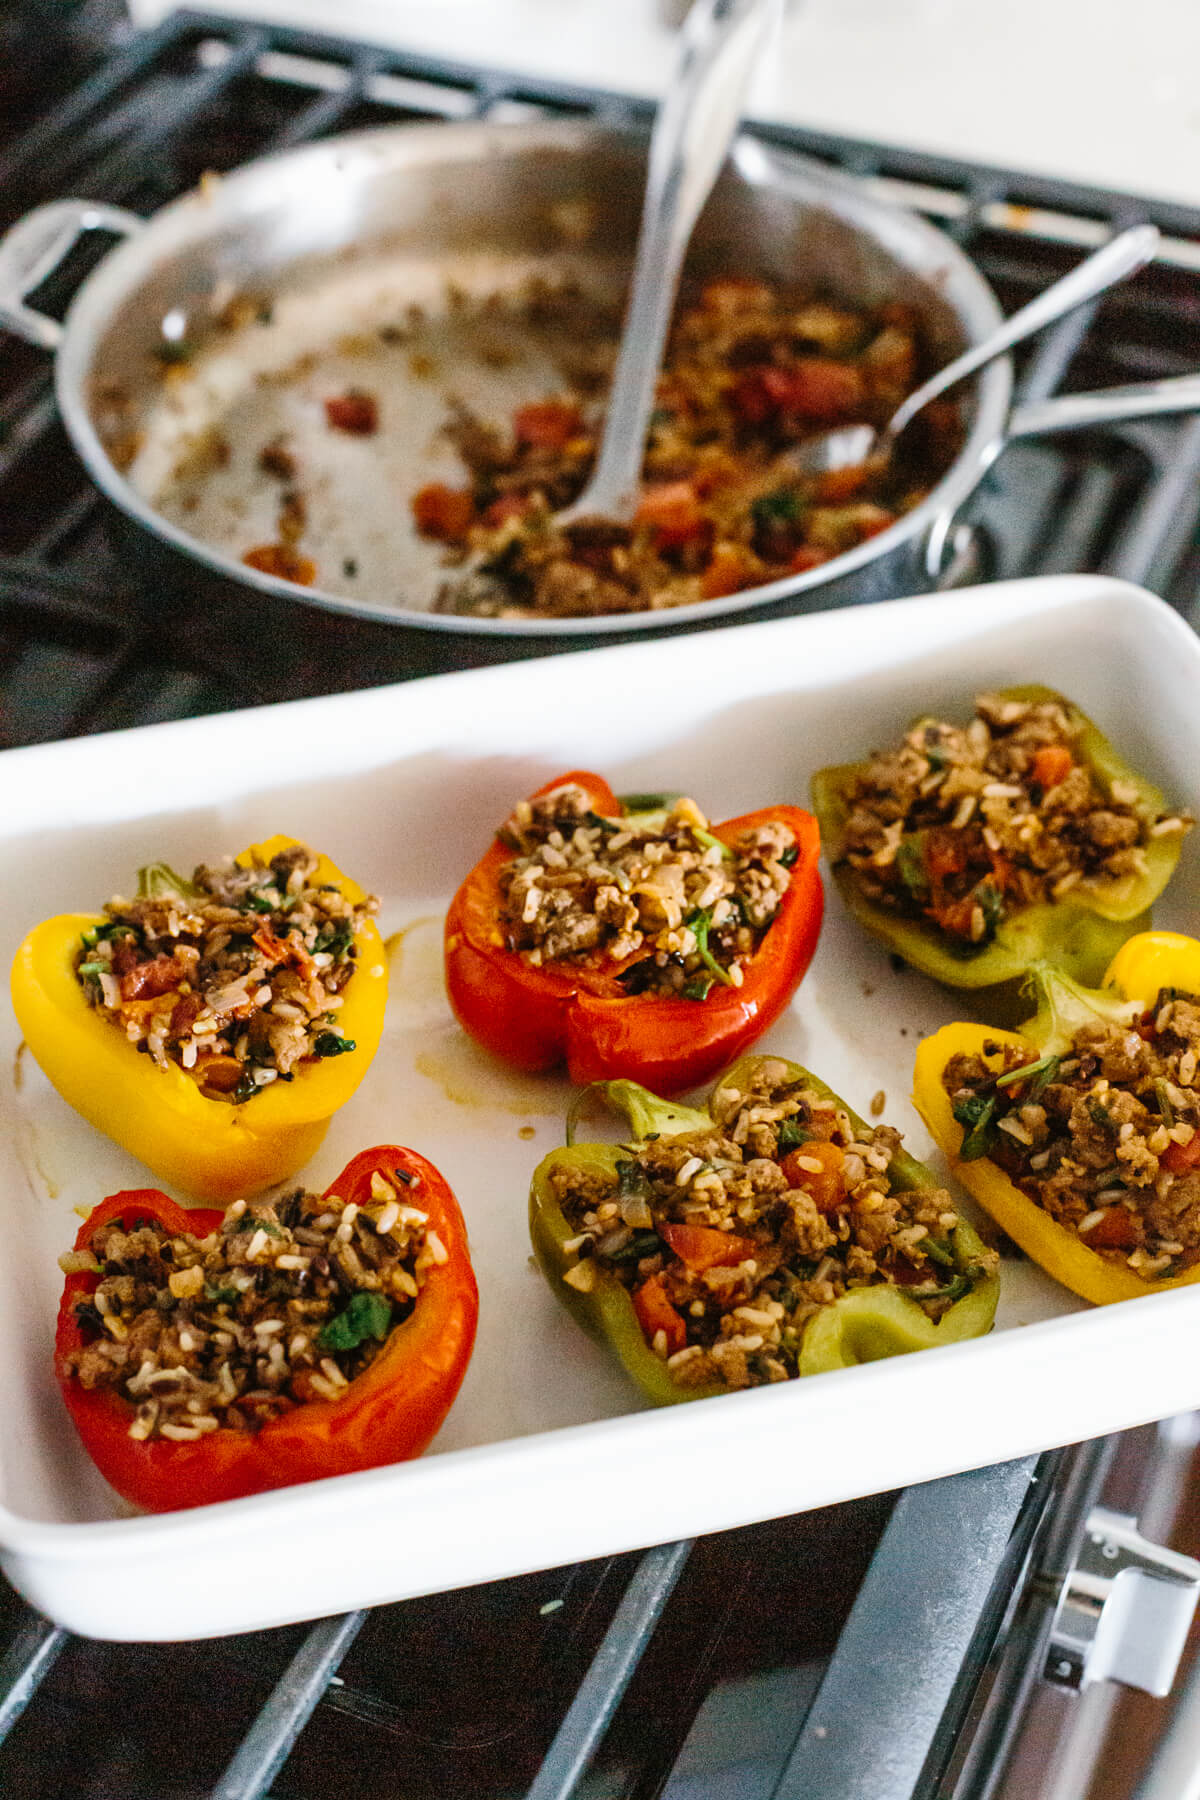 Filling the peppers with the stuffing.